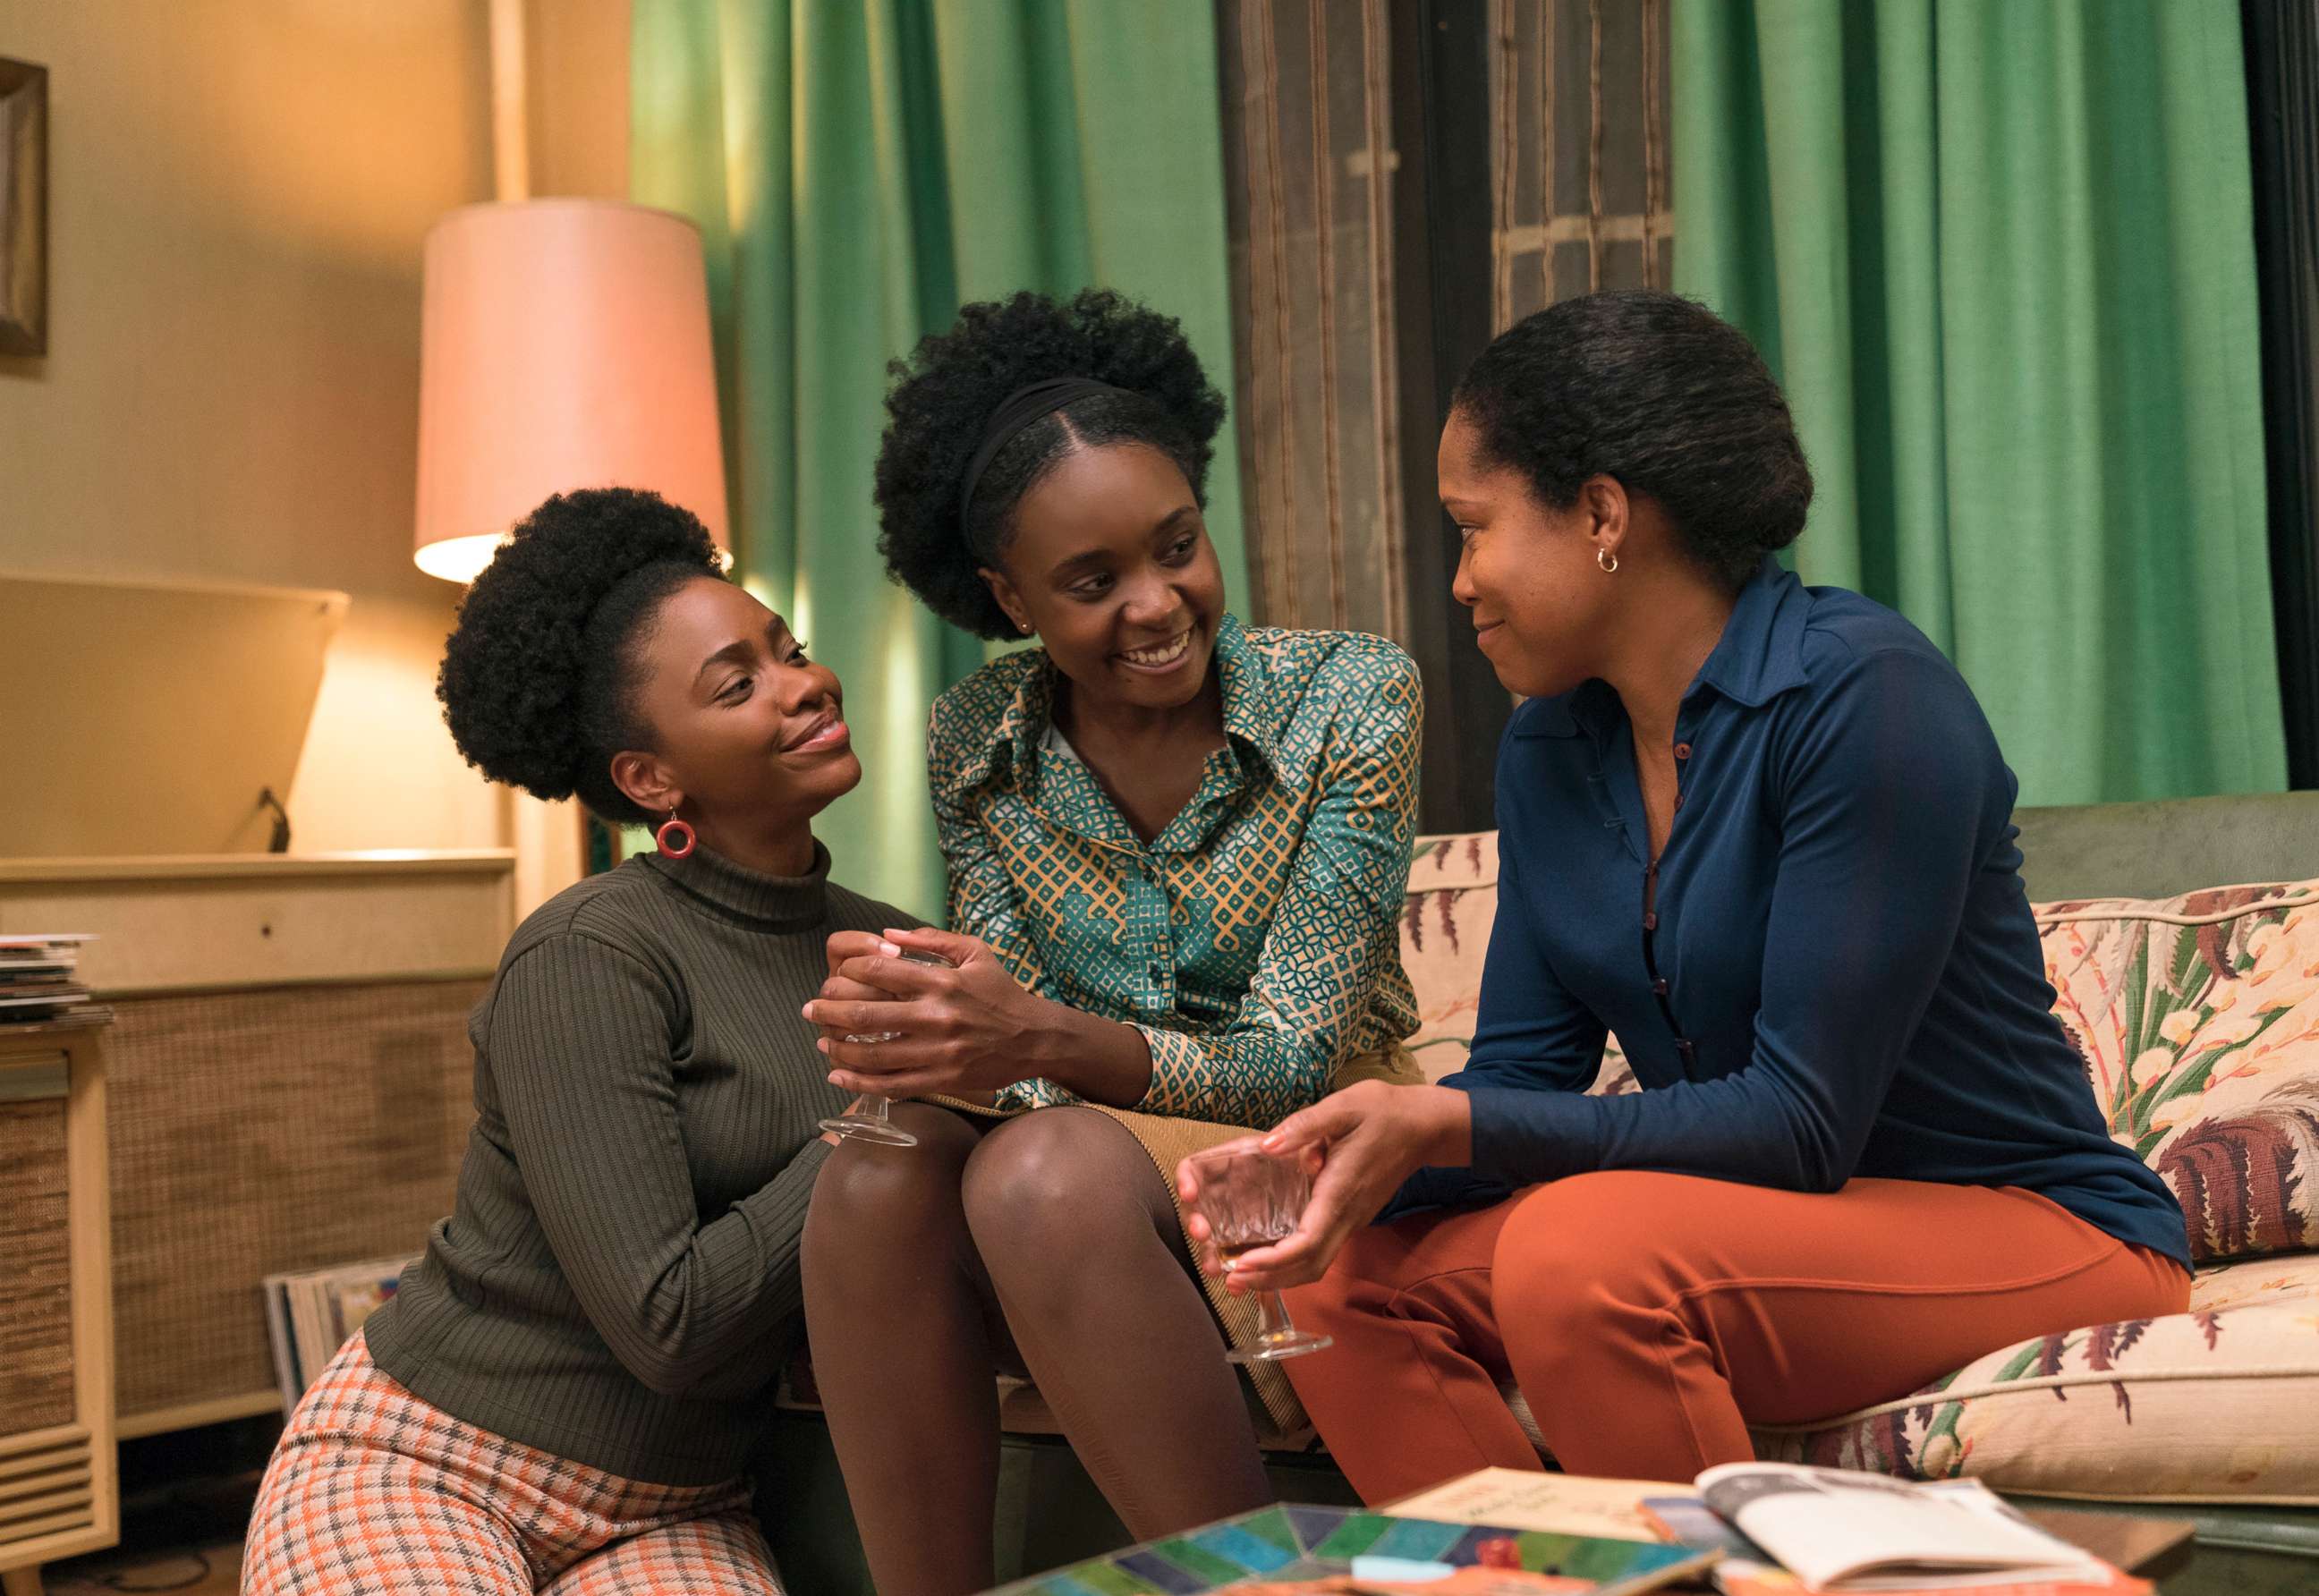 PHOTO: Teyonah Parris, left, KiKi Layne and Regina King in a scene from "If Beale Street Could Talk."